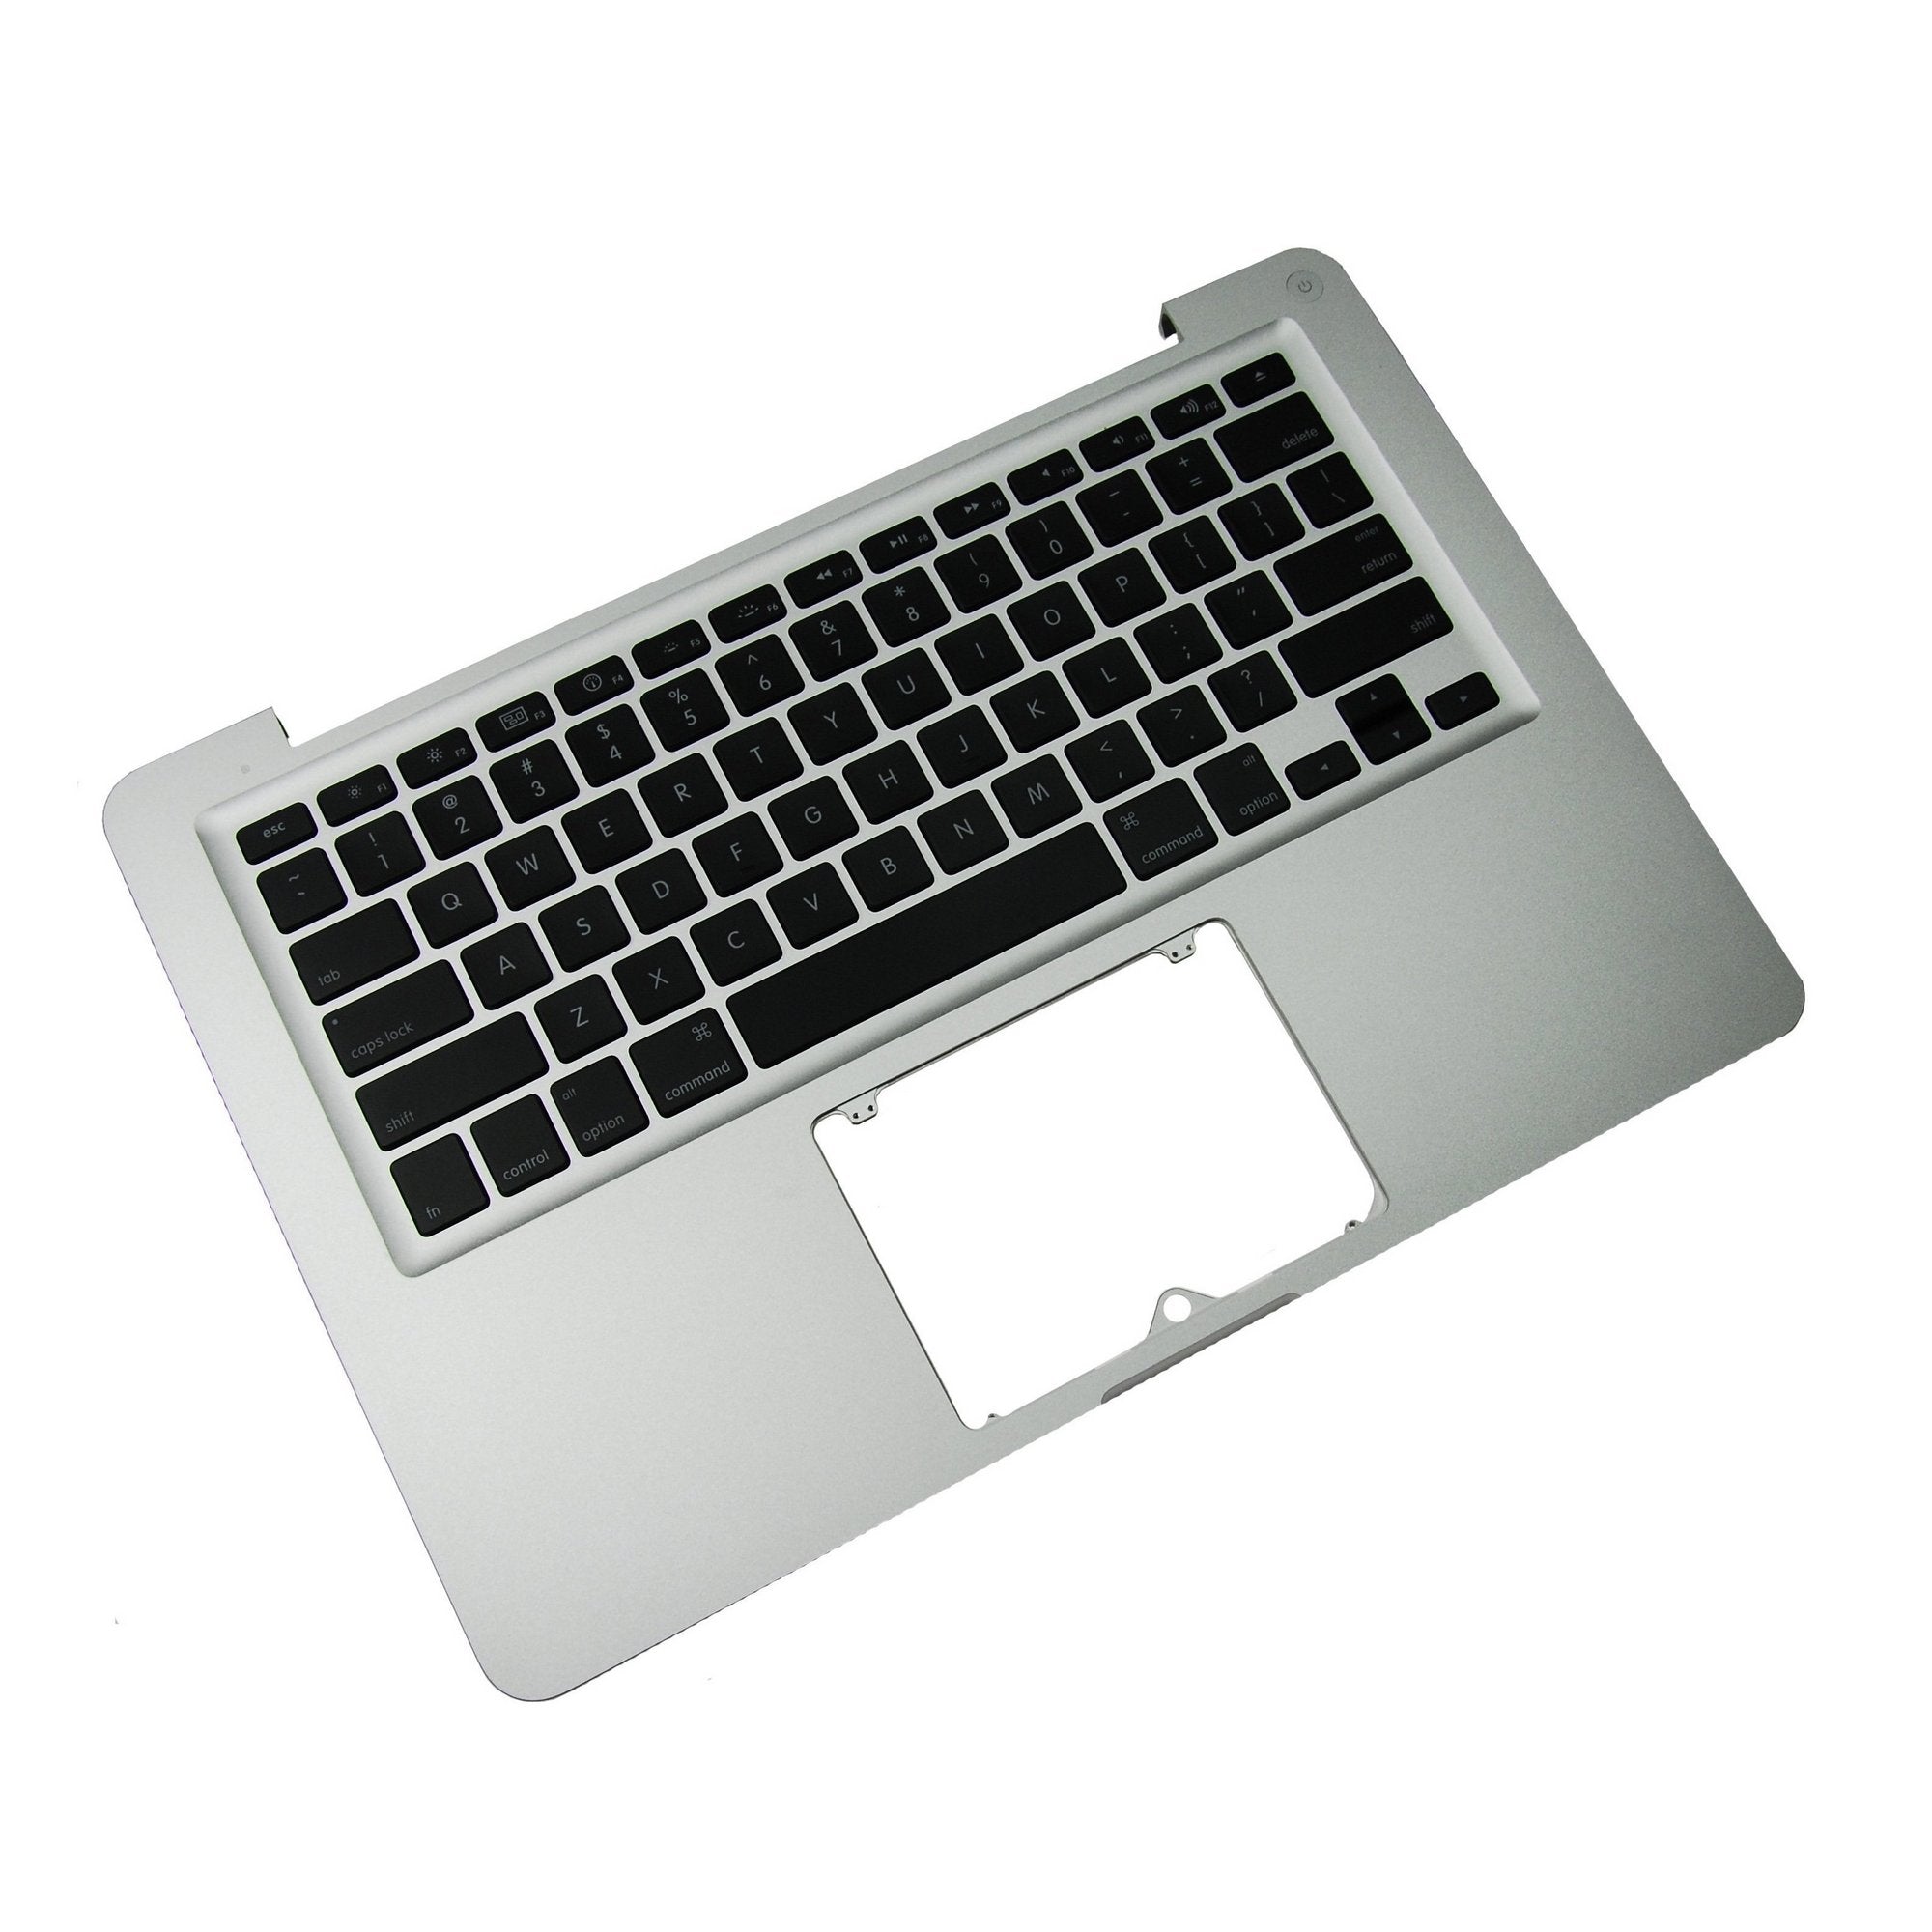 MacBook Pro 13" Unibody (Mid 2009-Mid 2010) Upper Case Used, A-Stock With Keyboard